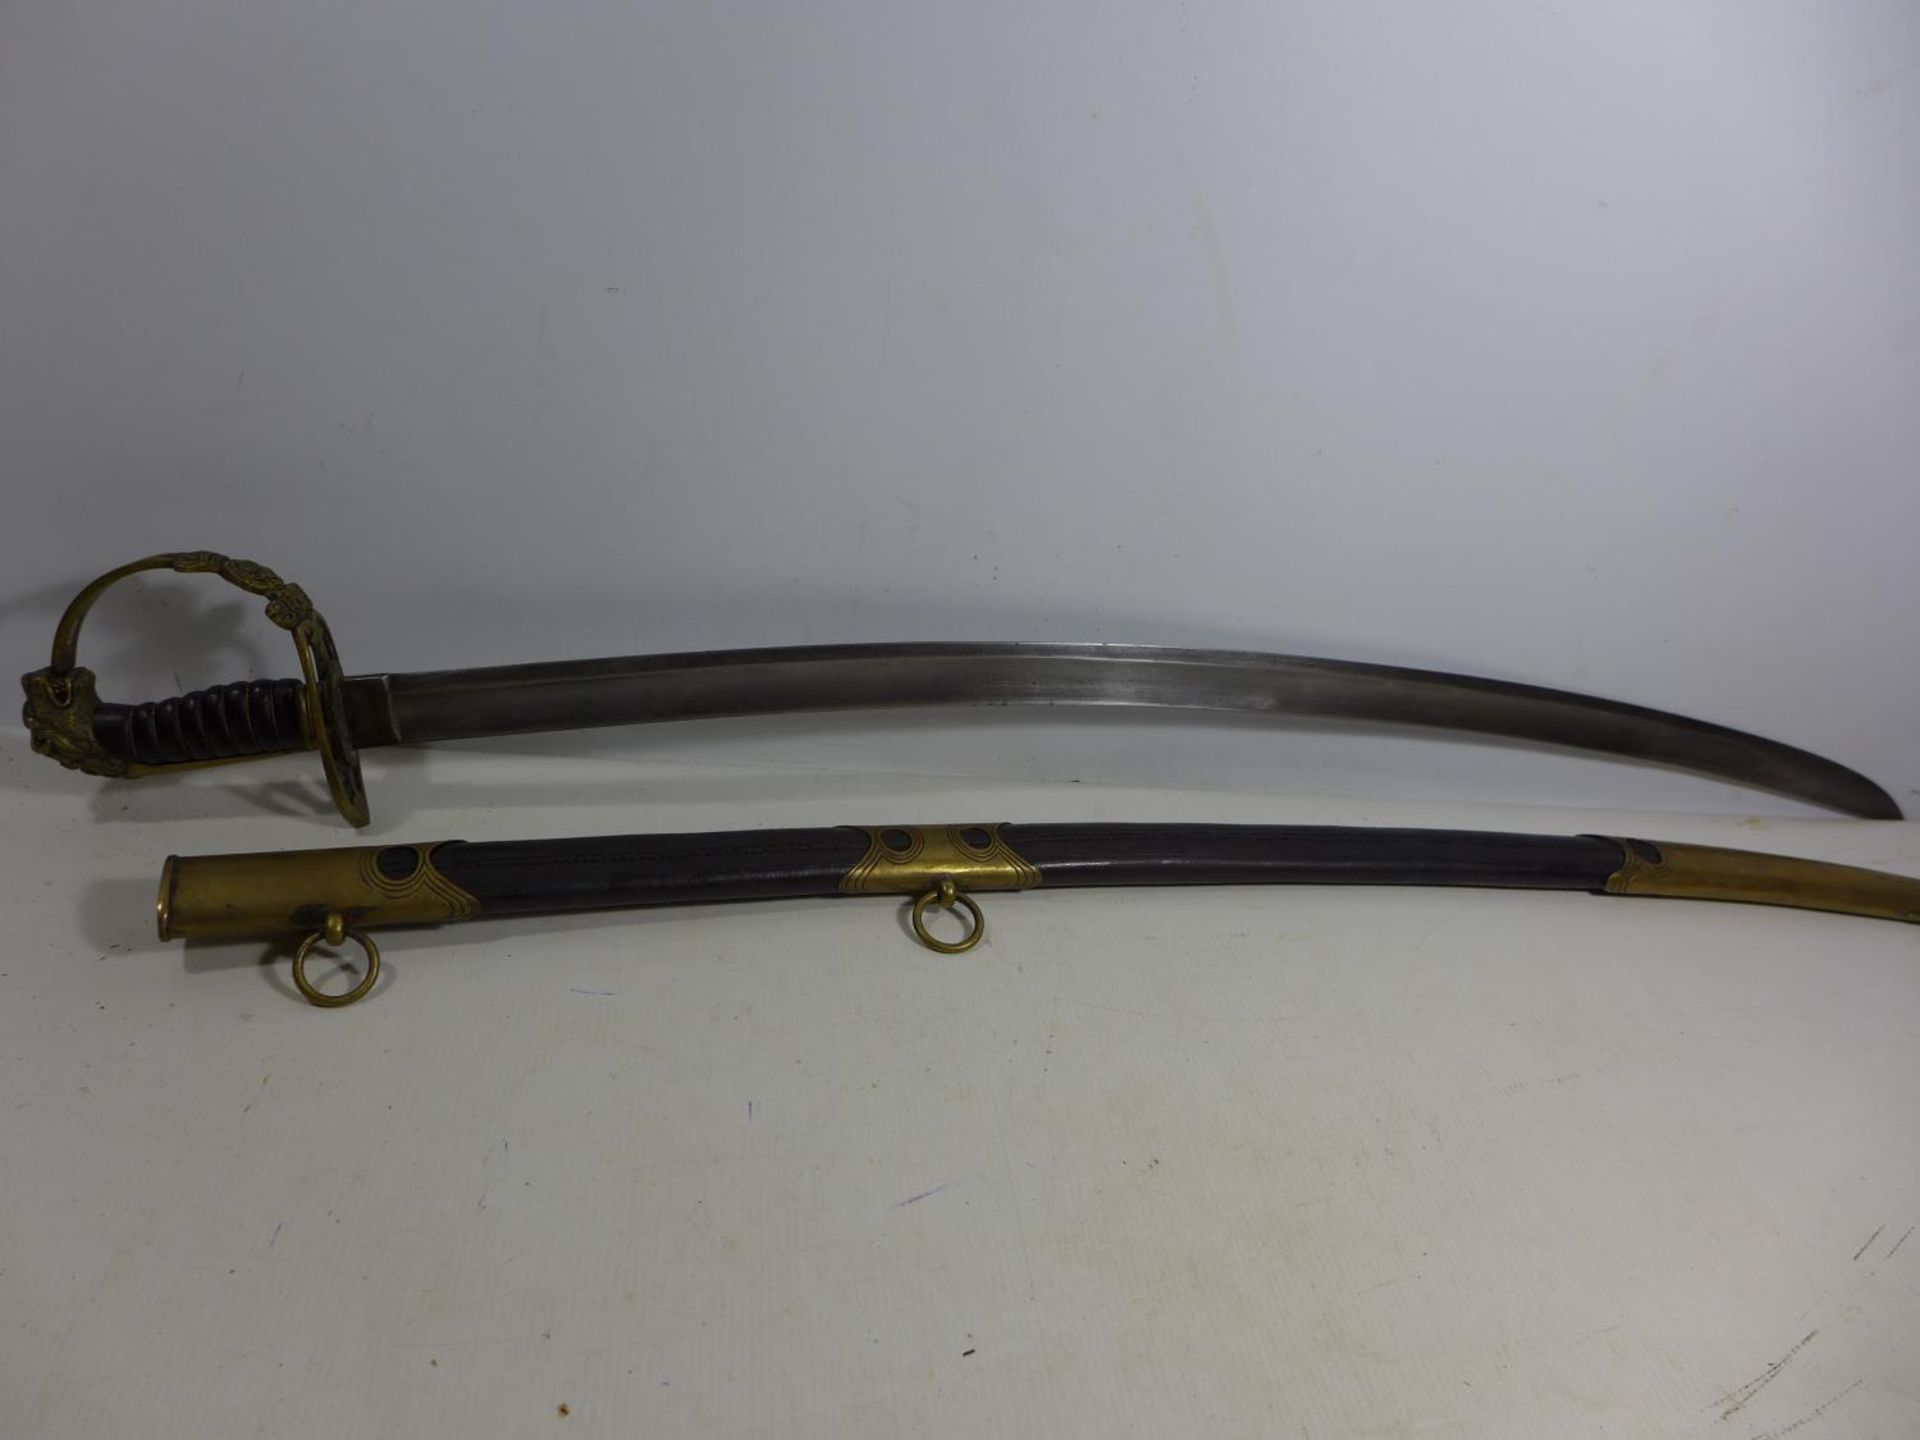 A REPLICA OF A BRITISH NAPOLEONIC WAR OFFICERS SWORD AND SCABBARD, 81CM BLADE, LENGTH 96CM - Image 5 of 8